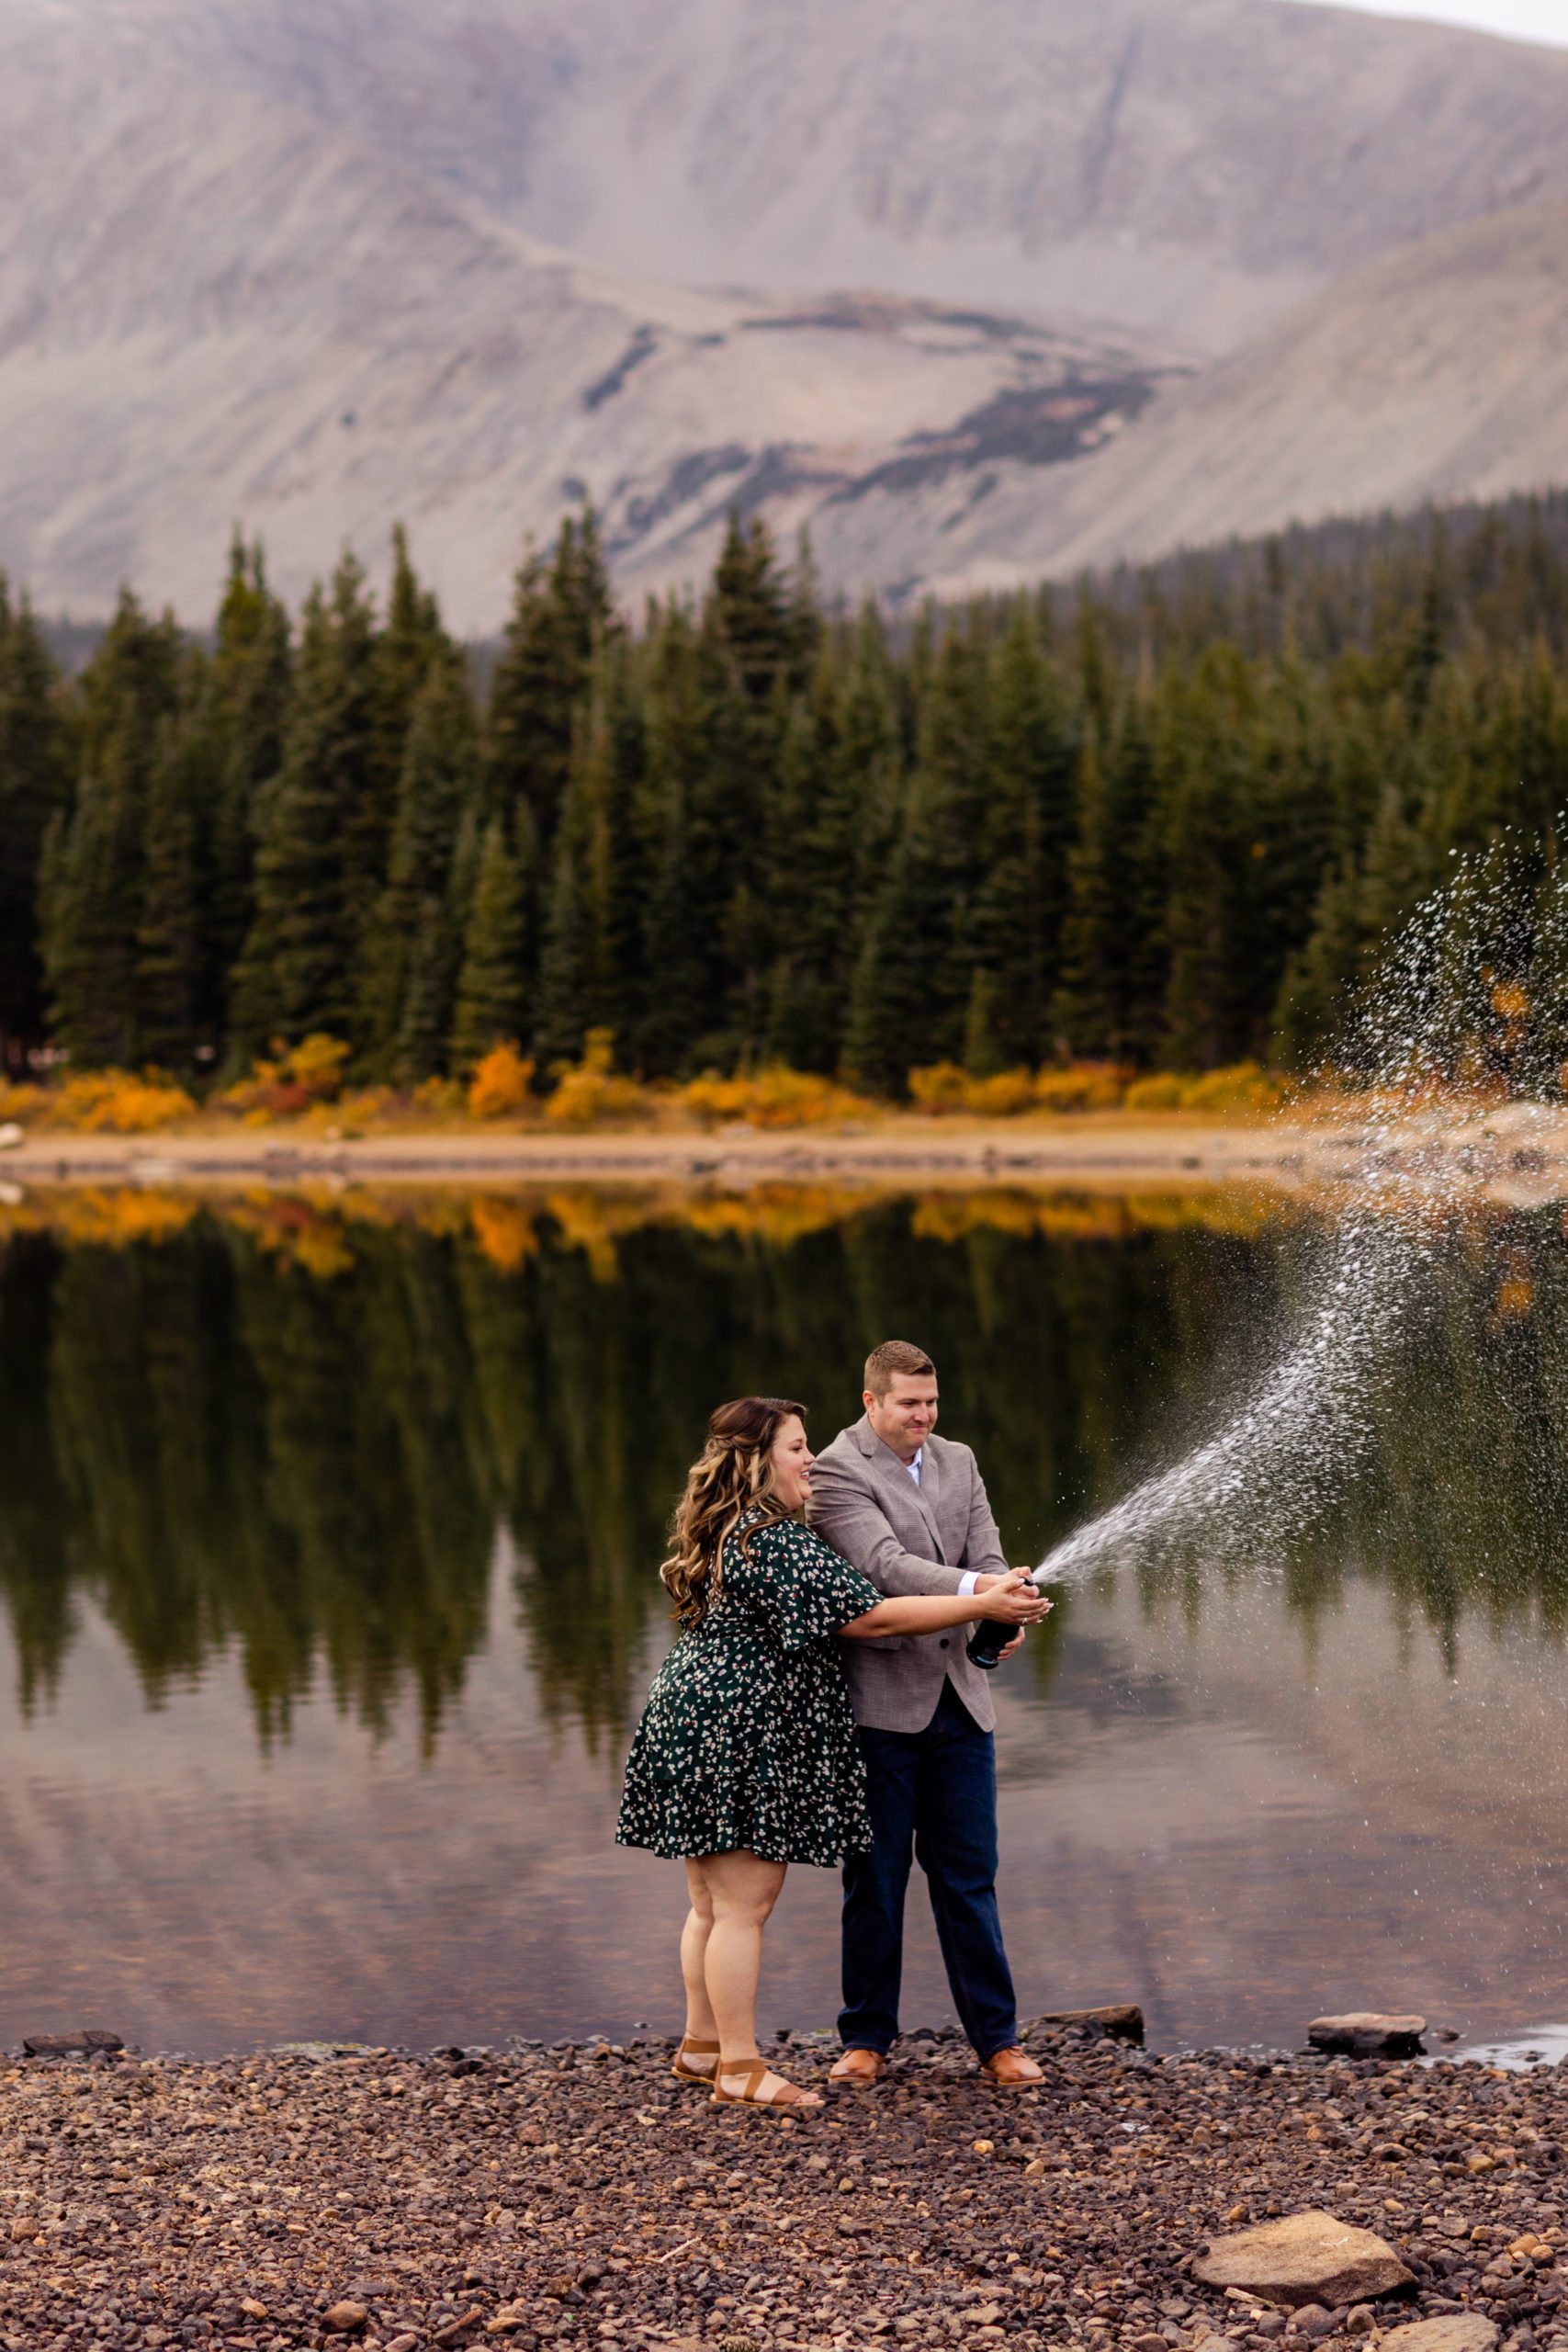 Champagne popping engagement photos, Colorado engagement photos, Brainard Lake Engagement Photos, Rocky Mountain Engagement Photos, Fall engagement photos, what to wear for engagement photos, engagement photo outfit inspiration, fall engagement photo outfits, mountain engagement photo ideas